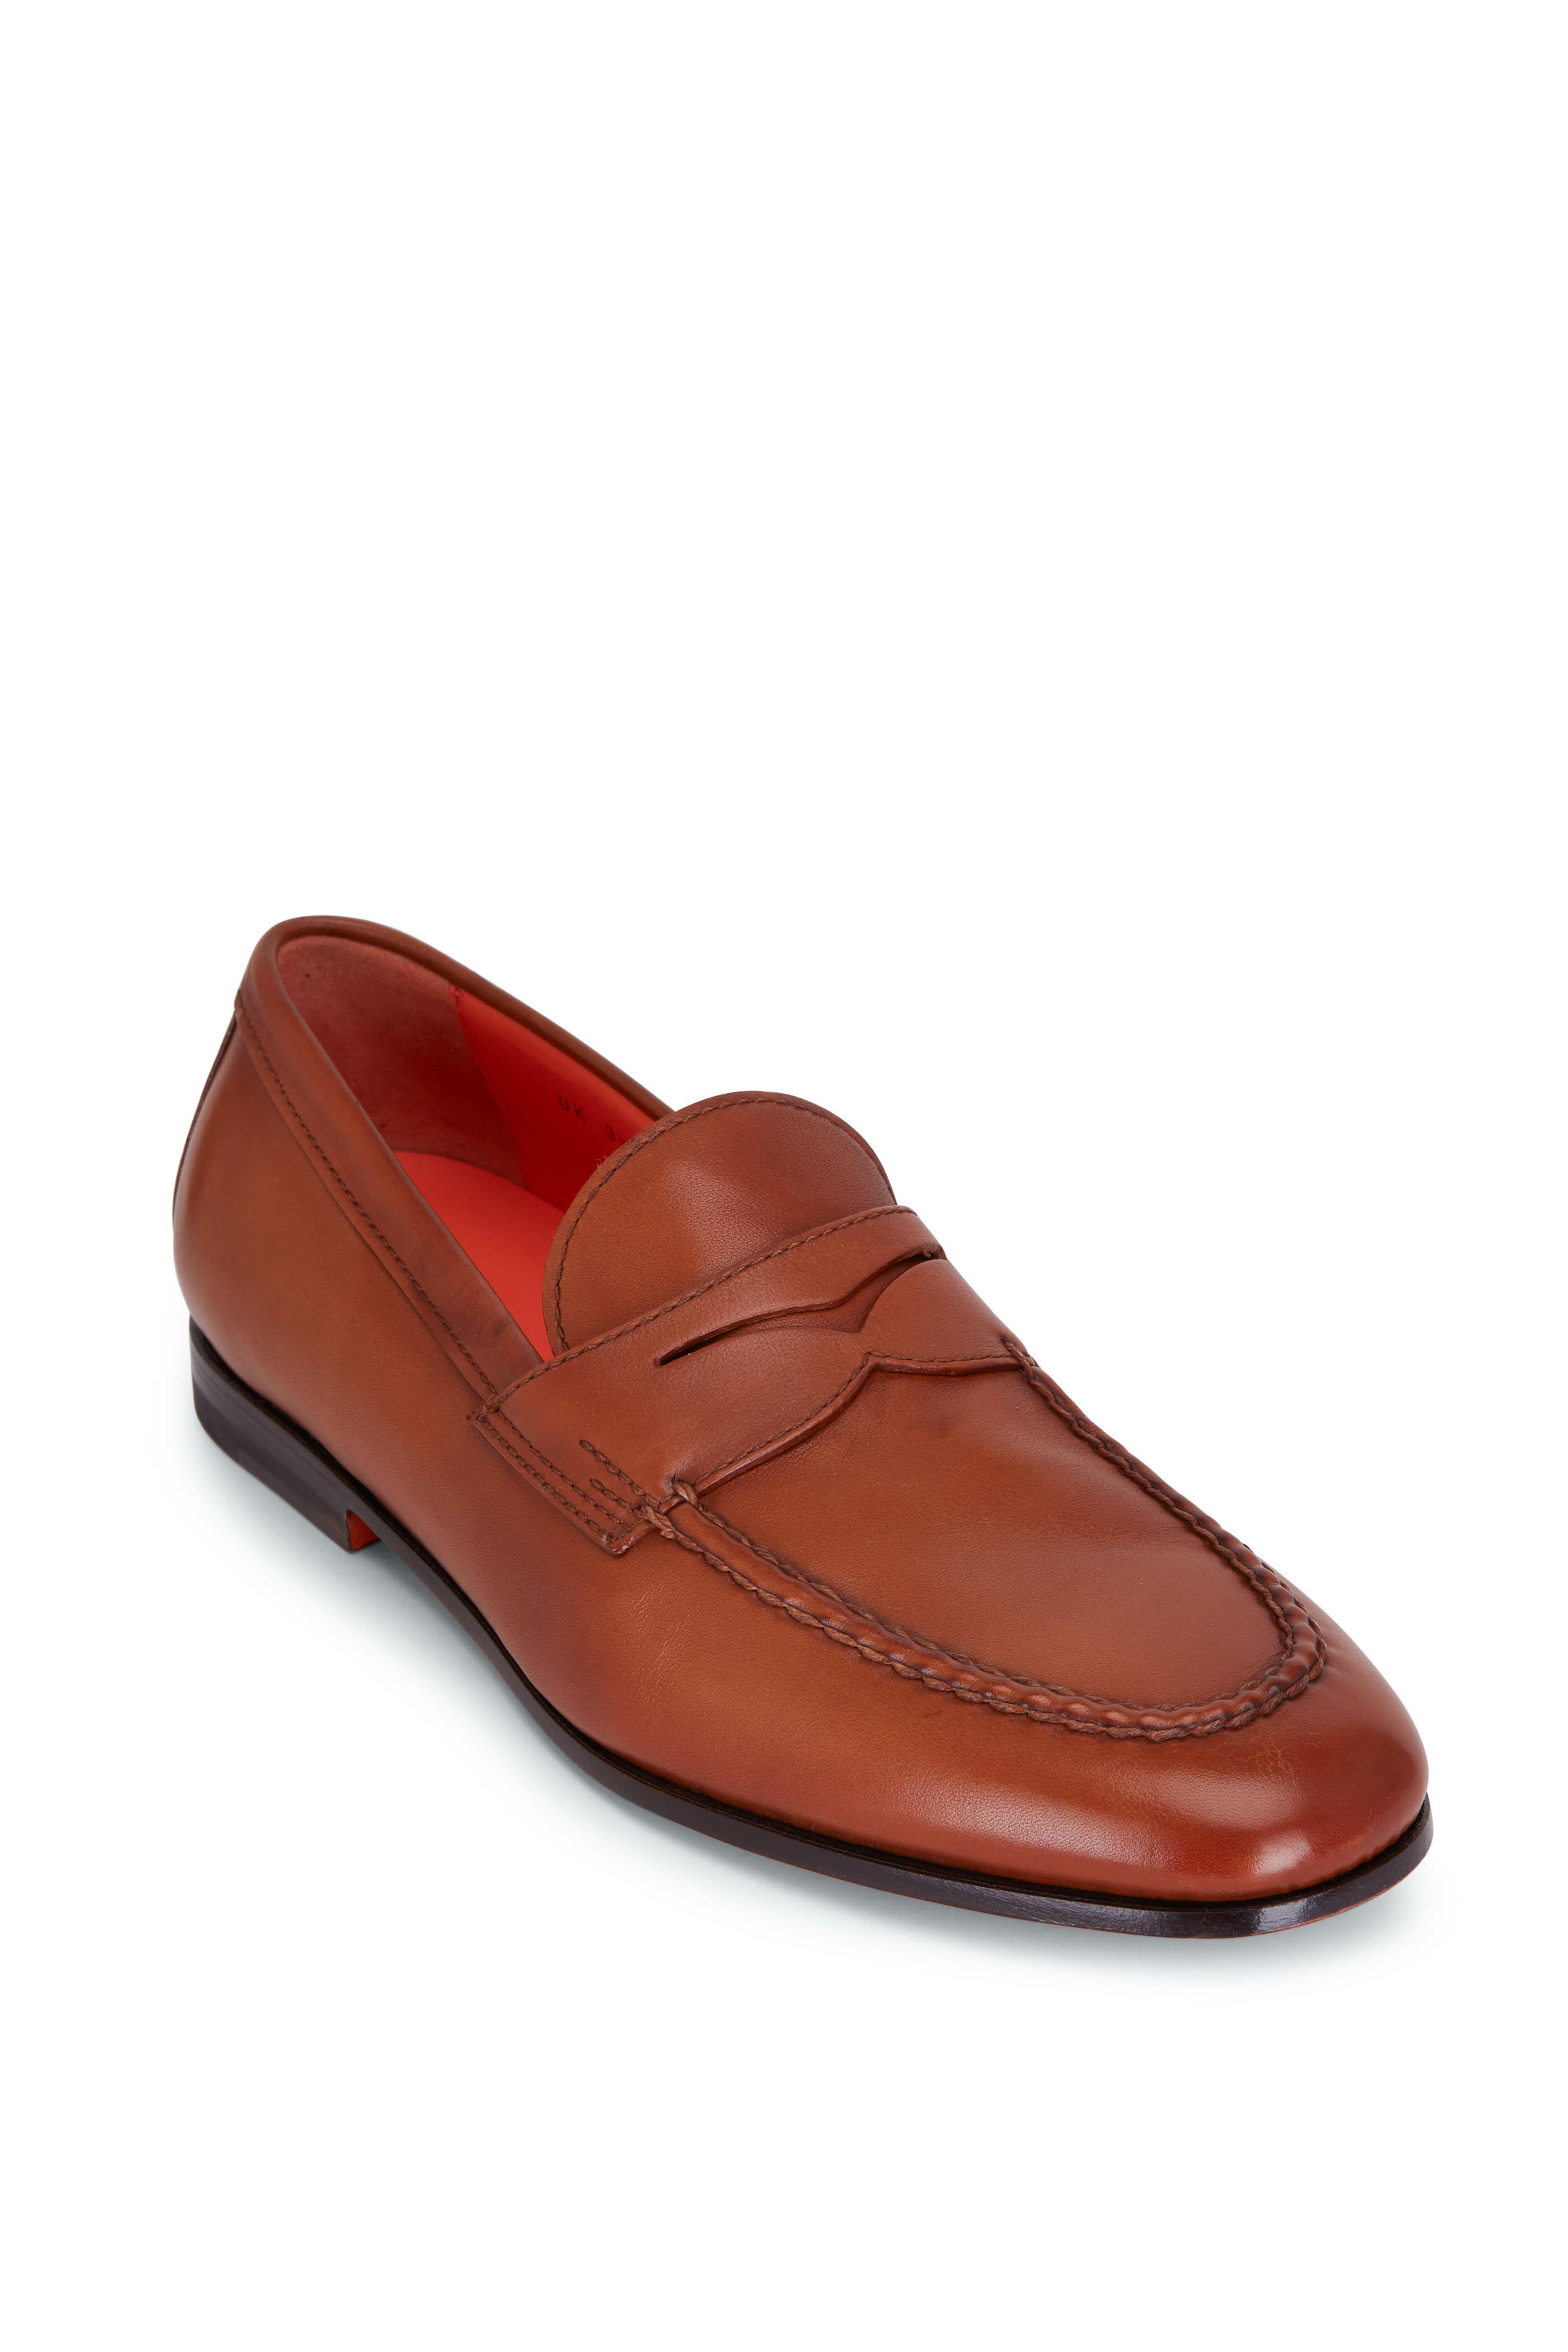 Santoni - Door Leather Penny Loafer | Mitchell Stores